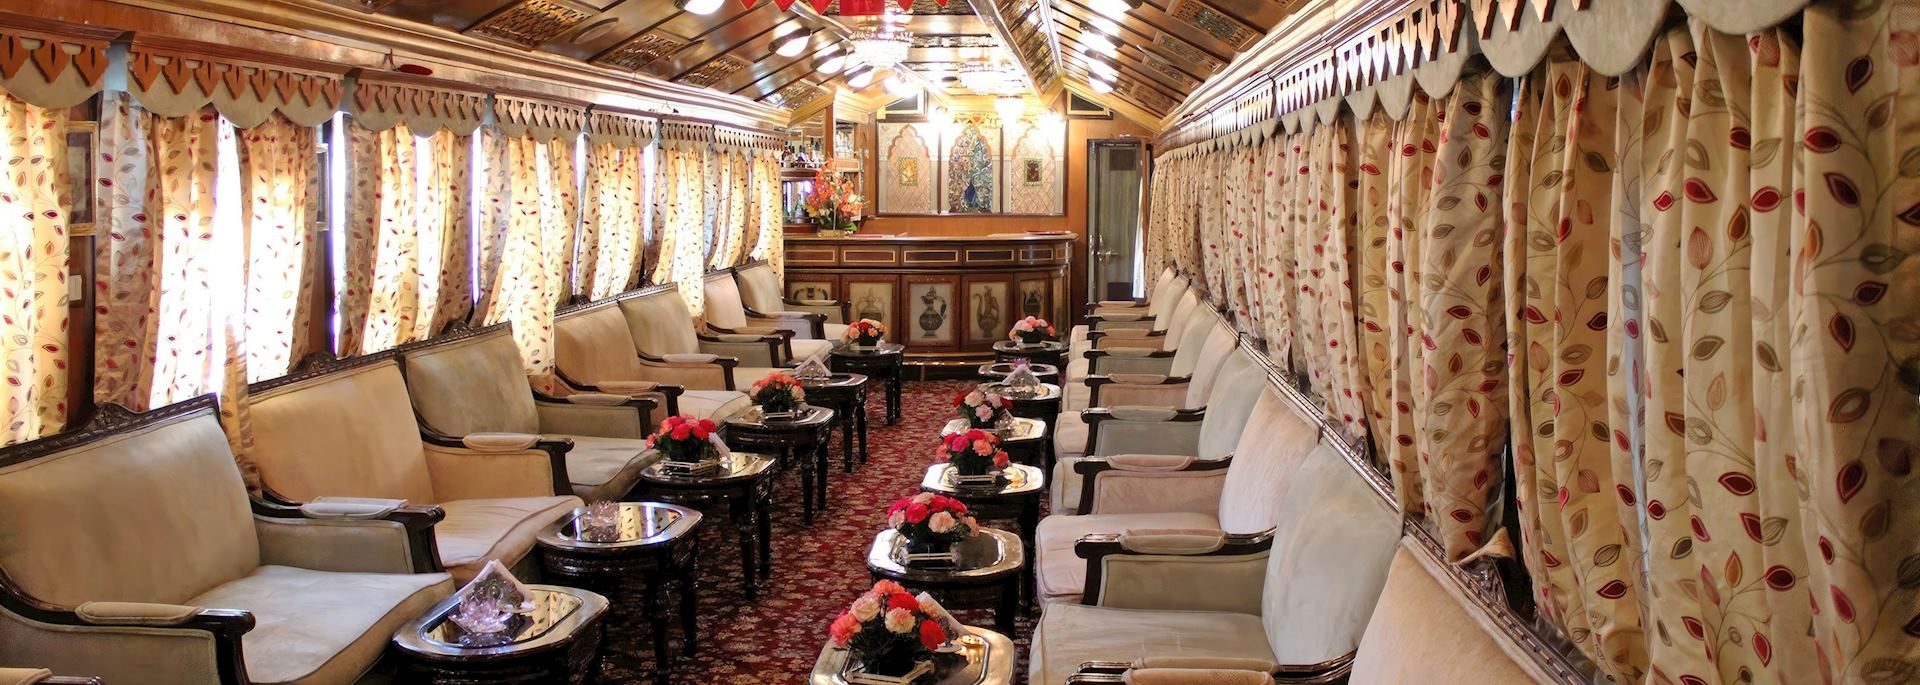 Palace on Wheels carriage